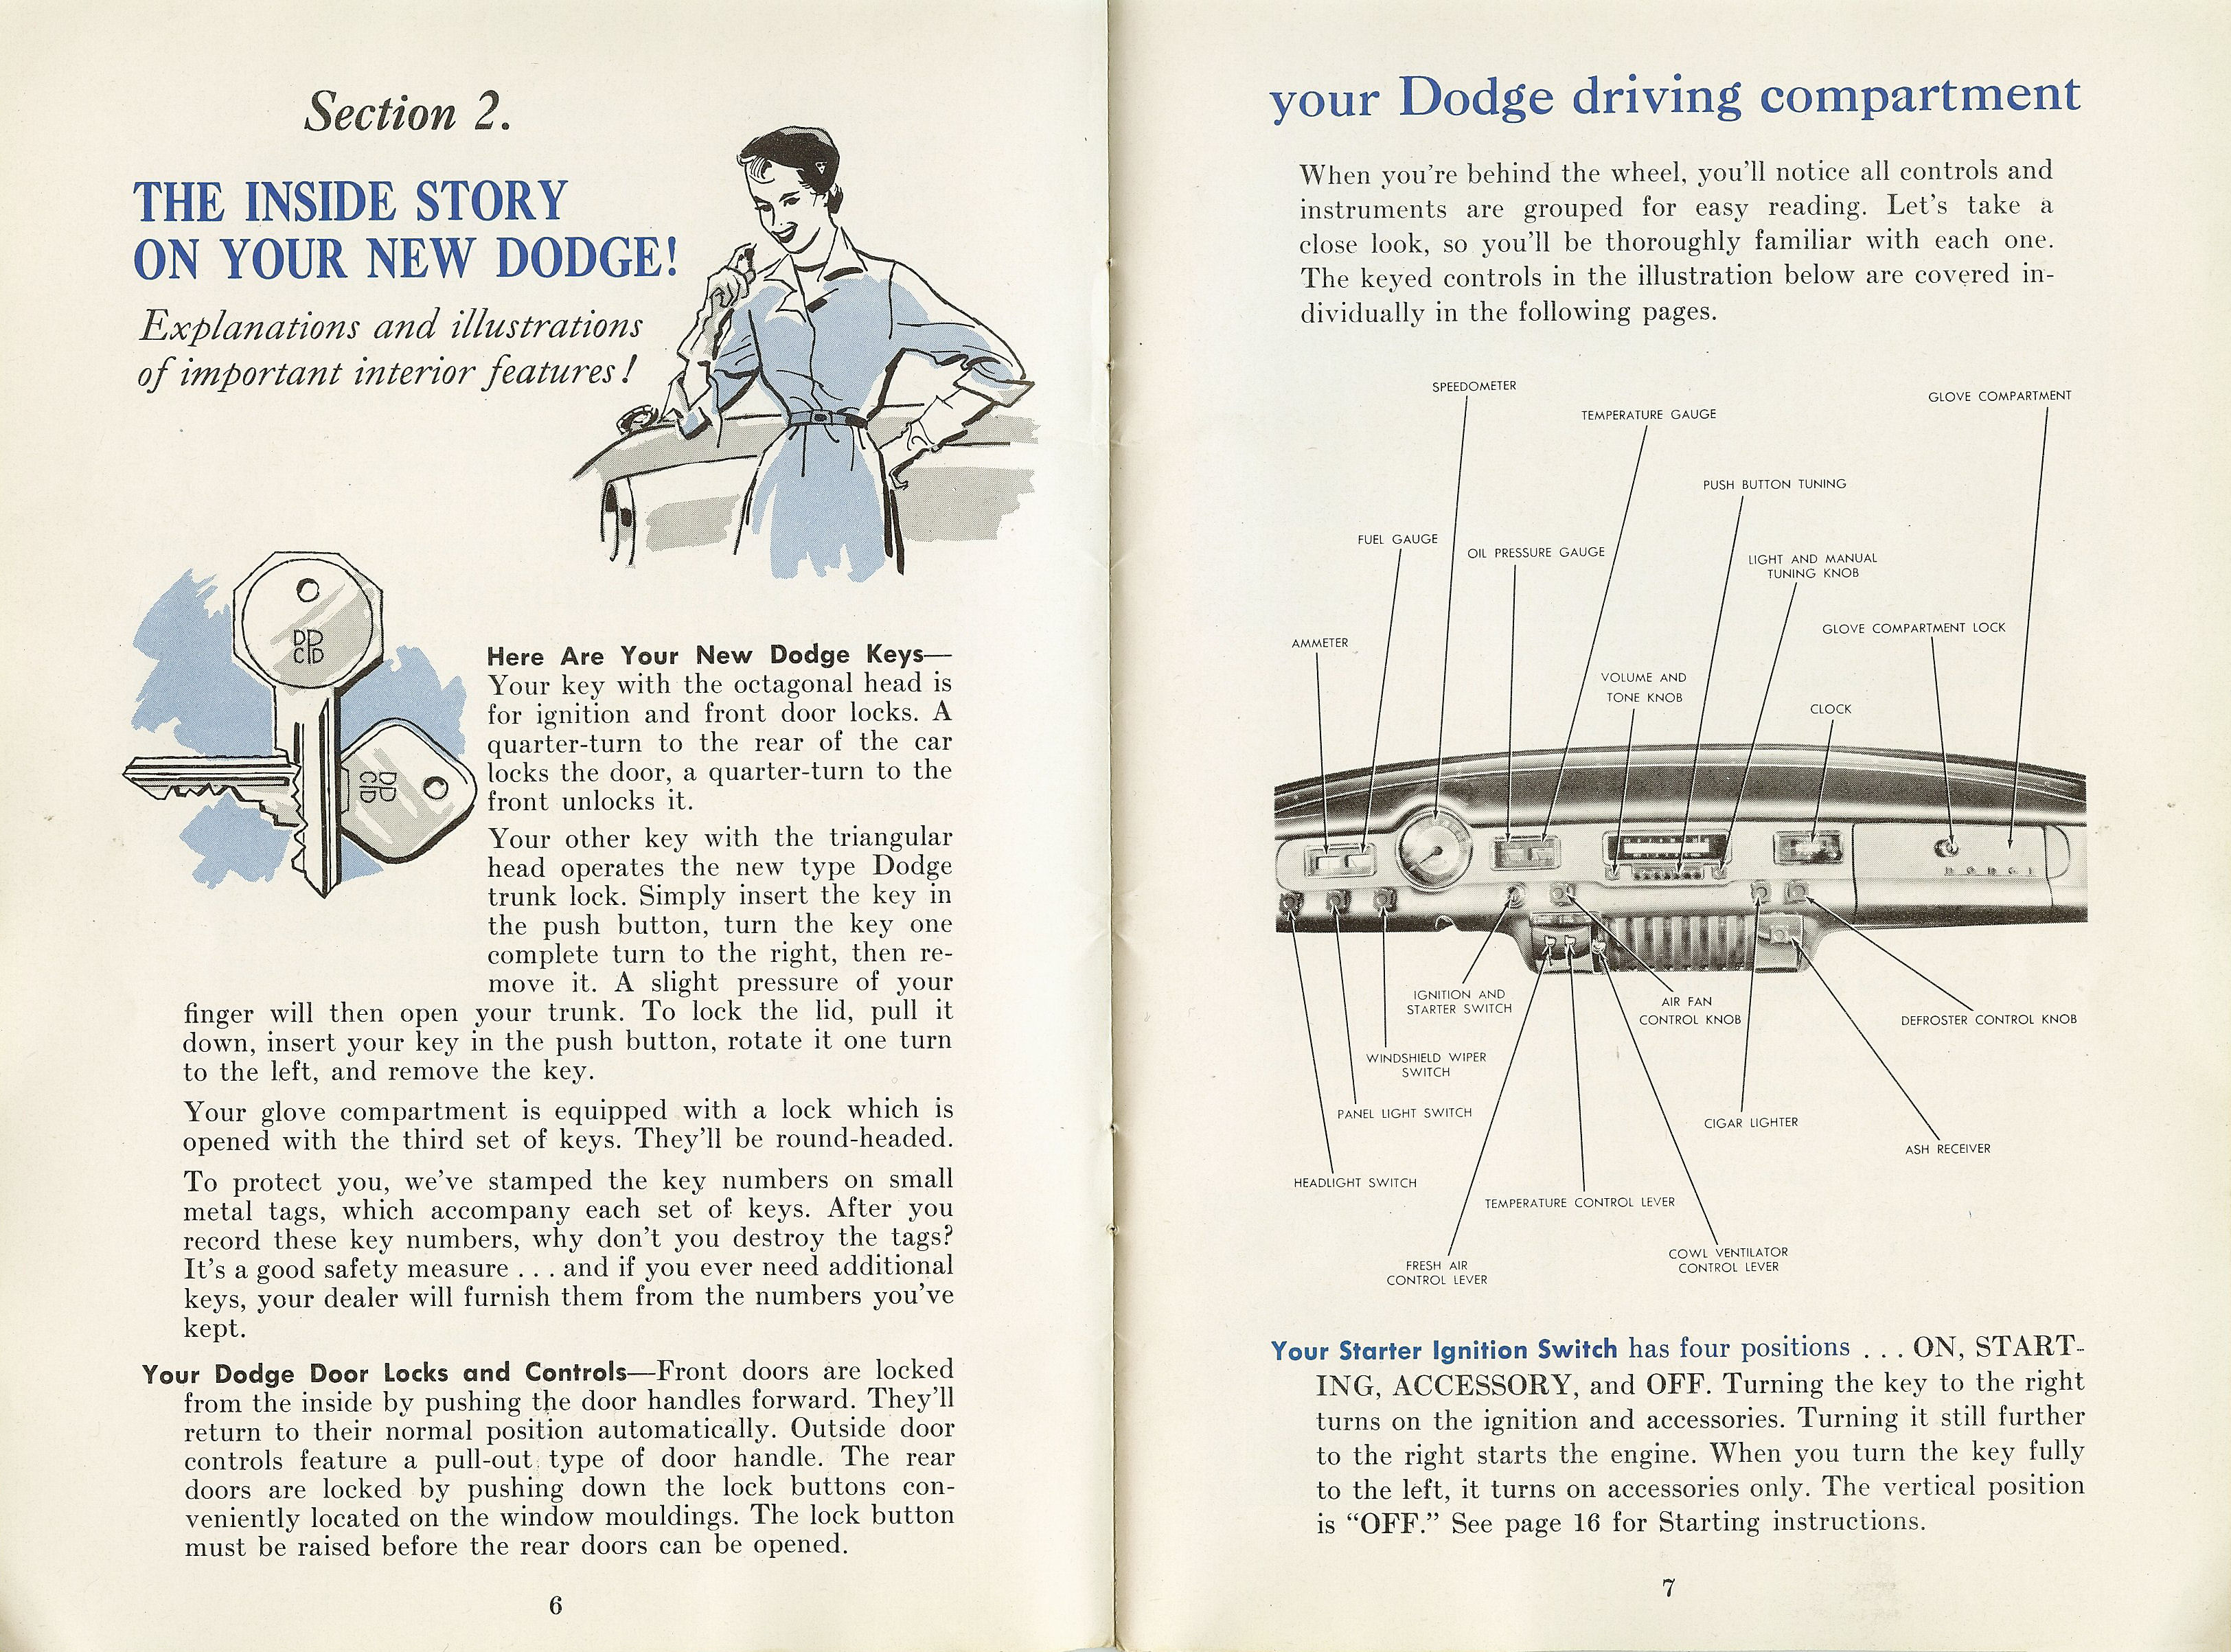 1954_Dodge_Owners_Manual-06-07